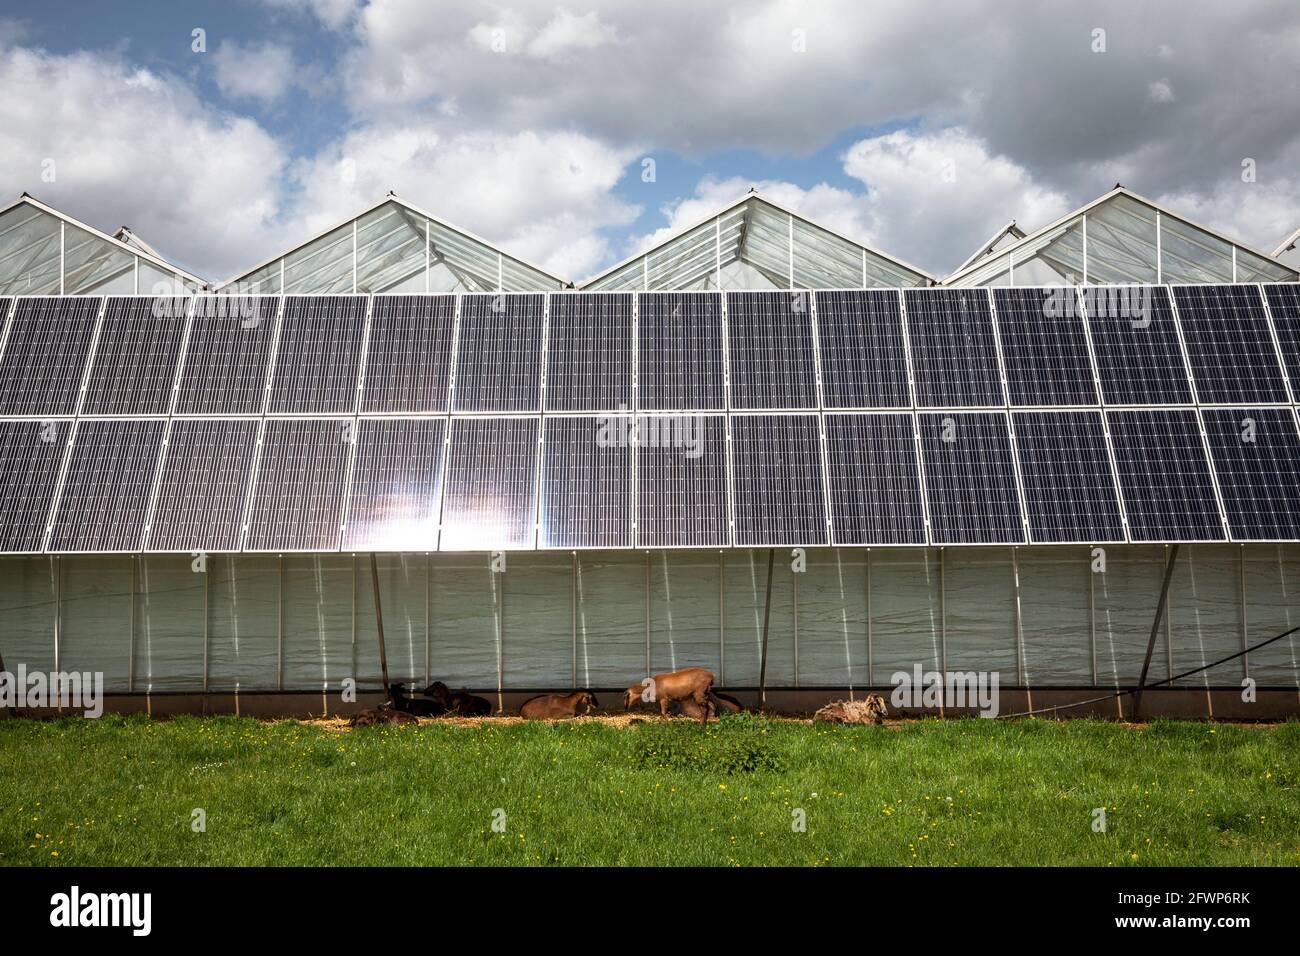 photovoltaic modules, solar panels on greenhouses of a nursery garden in Pulheim-Sinnersdorf, goats lie in the shade, North Rhine-Westphalia, Germany. Stock Photo